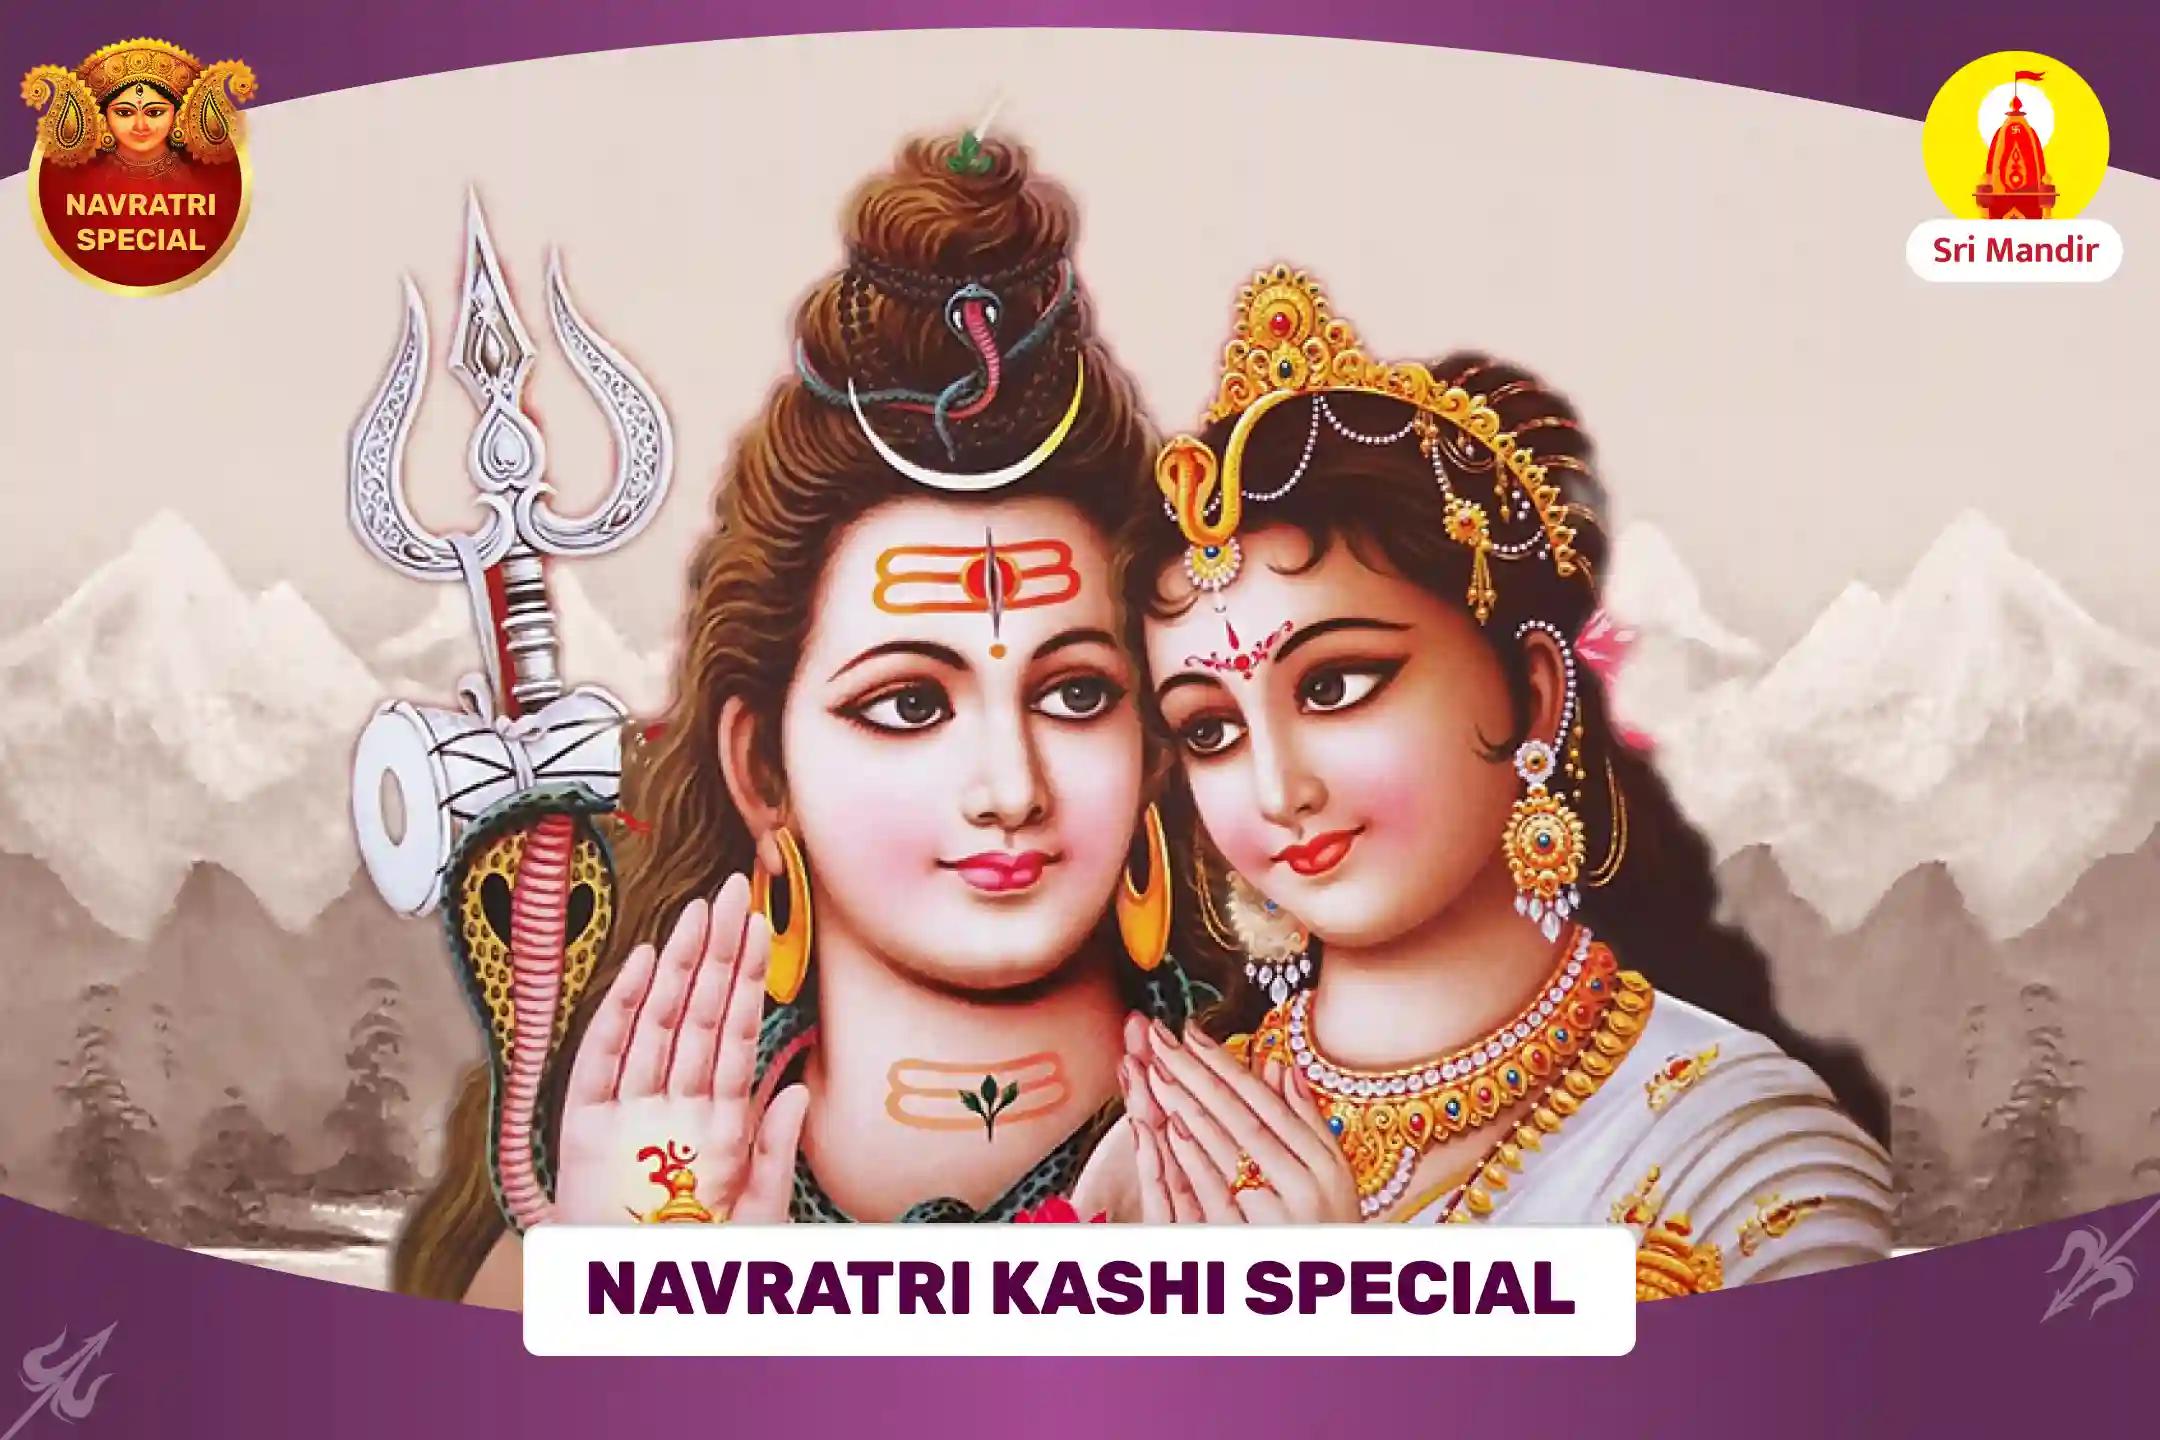 Navratri Kashi Special Gauri-Shankar Puja and Shiv-Gauri Stotra Path To Resolve Conflicts and Achieve Bliss in Relationship